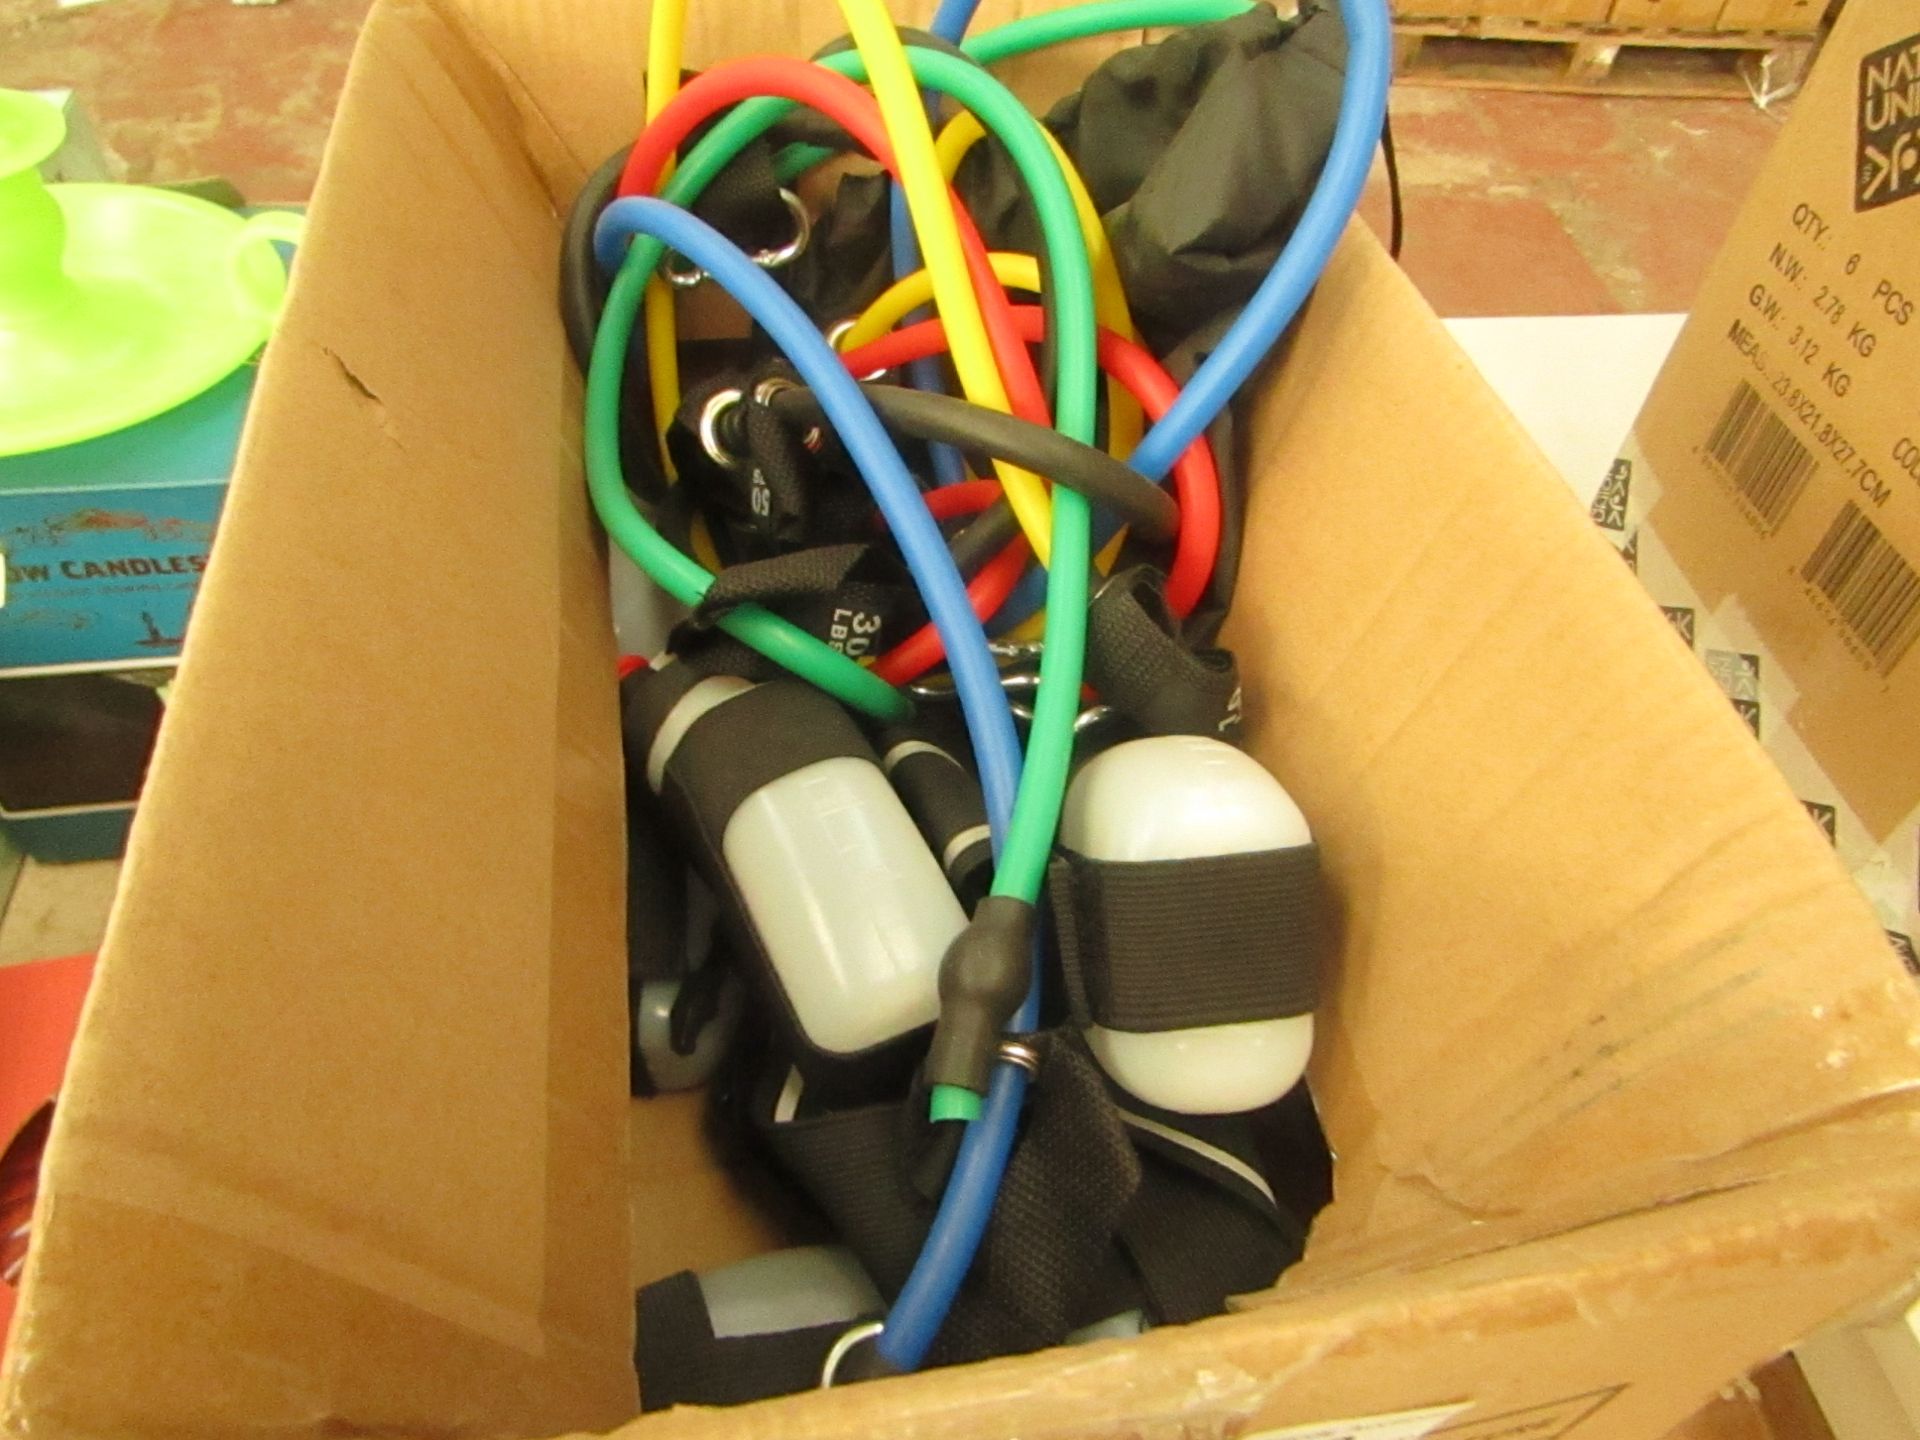 Box of approx 10x various items such as water bottles and elastic bands.